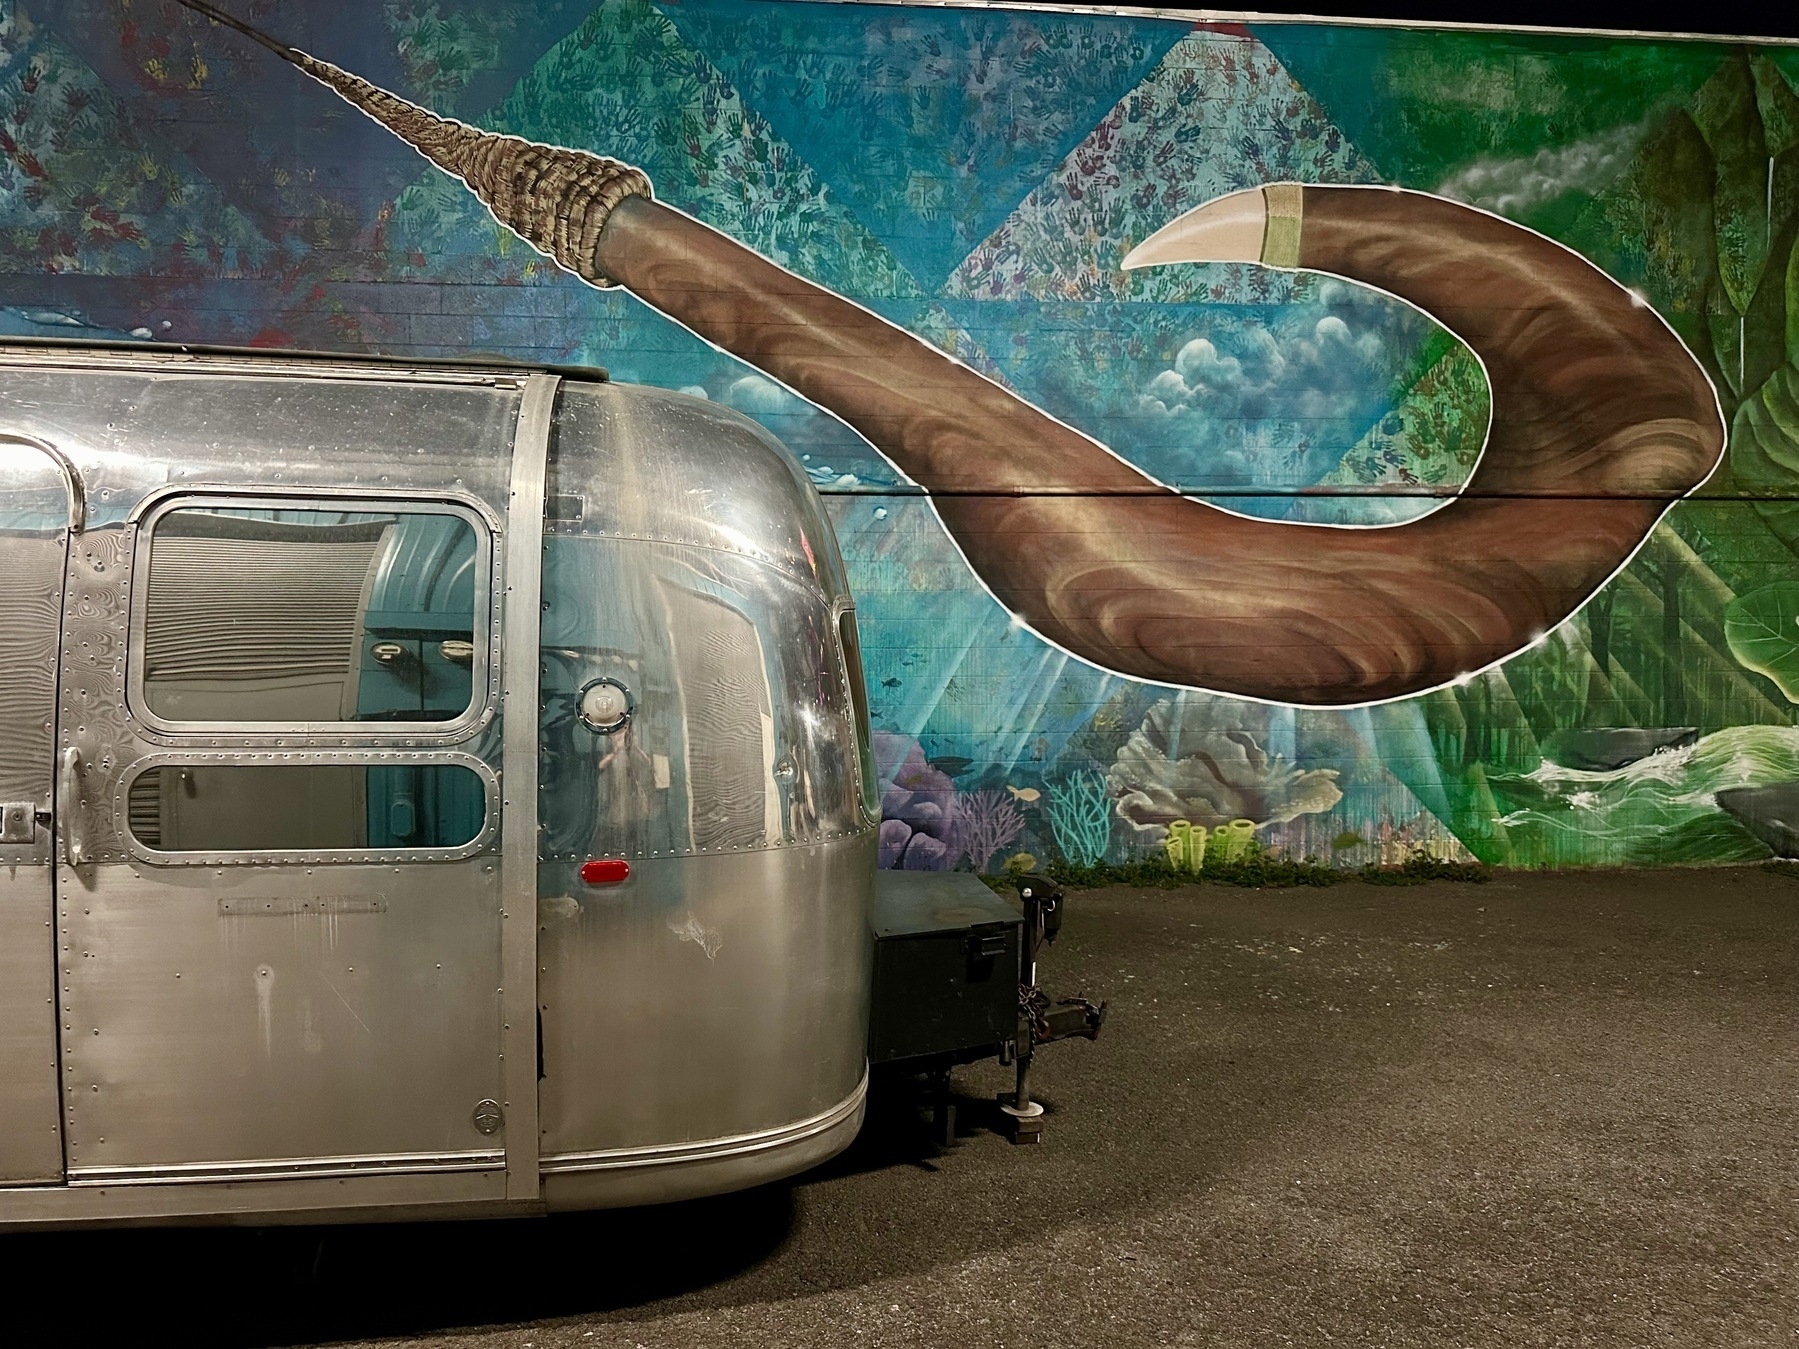 Photo of a shiny metal trailer in front of a mural depicting a fish hook.